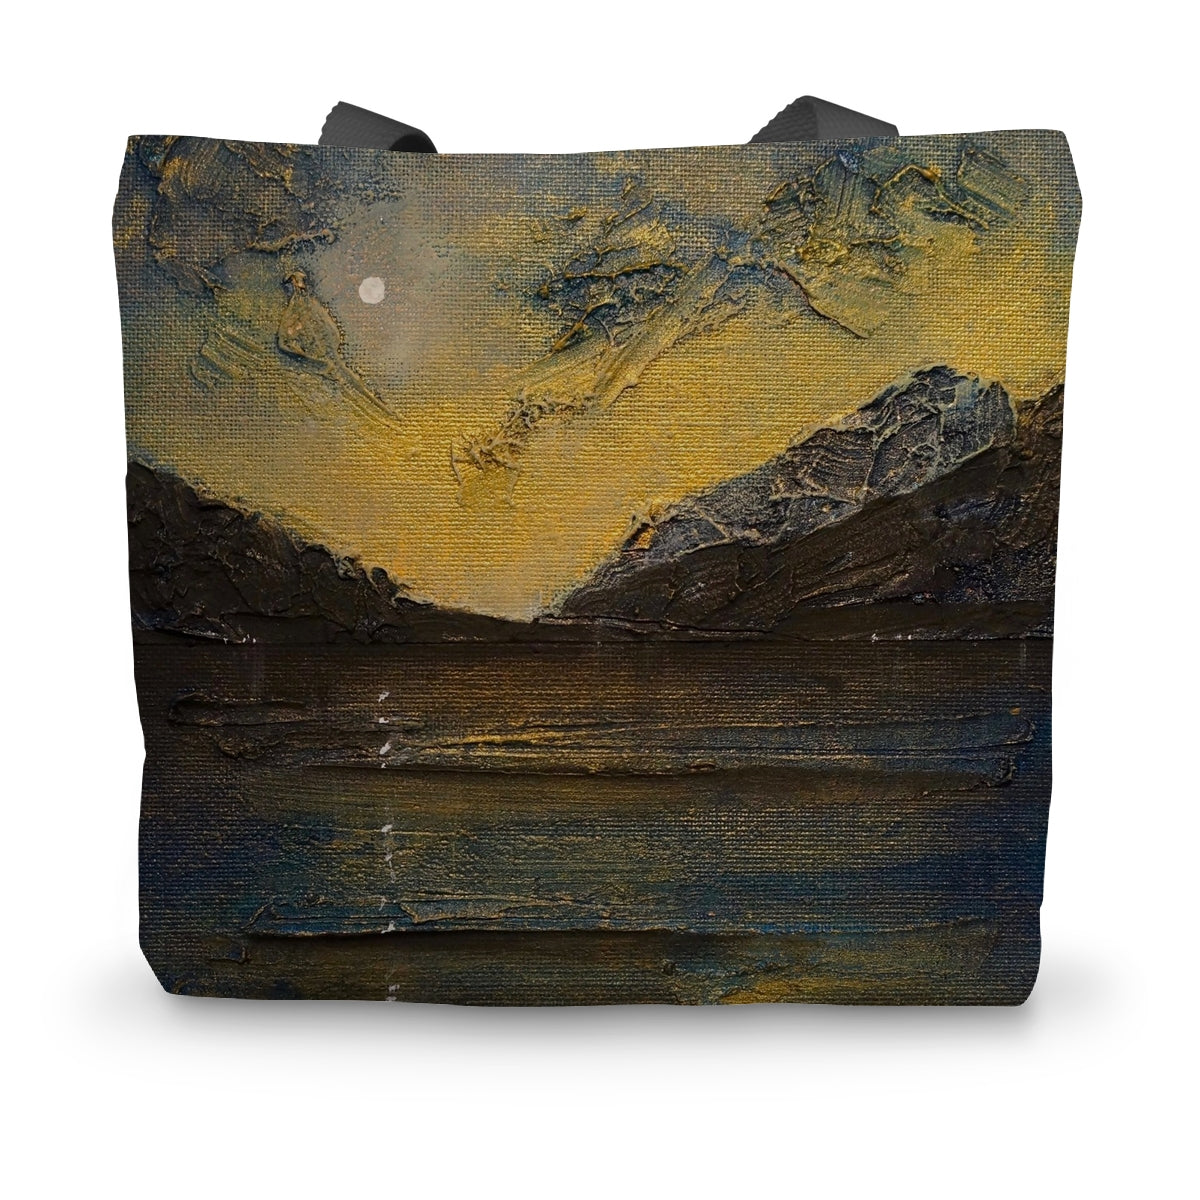 Loch Lomond Moonlight Art Gifts Canvas Tote Bag-Bags-Scottish Lochs & Mountains Art Gallery-14"x18.5"-Paintings, Prints, Homeware, Art Gifts From Scotland By Scottish Artist Kevin Hunter